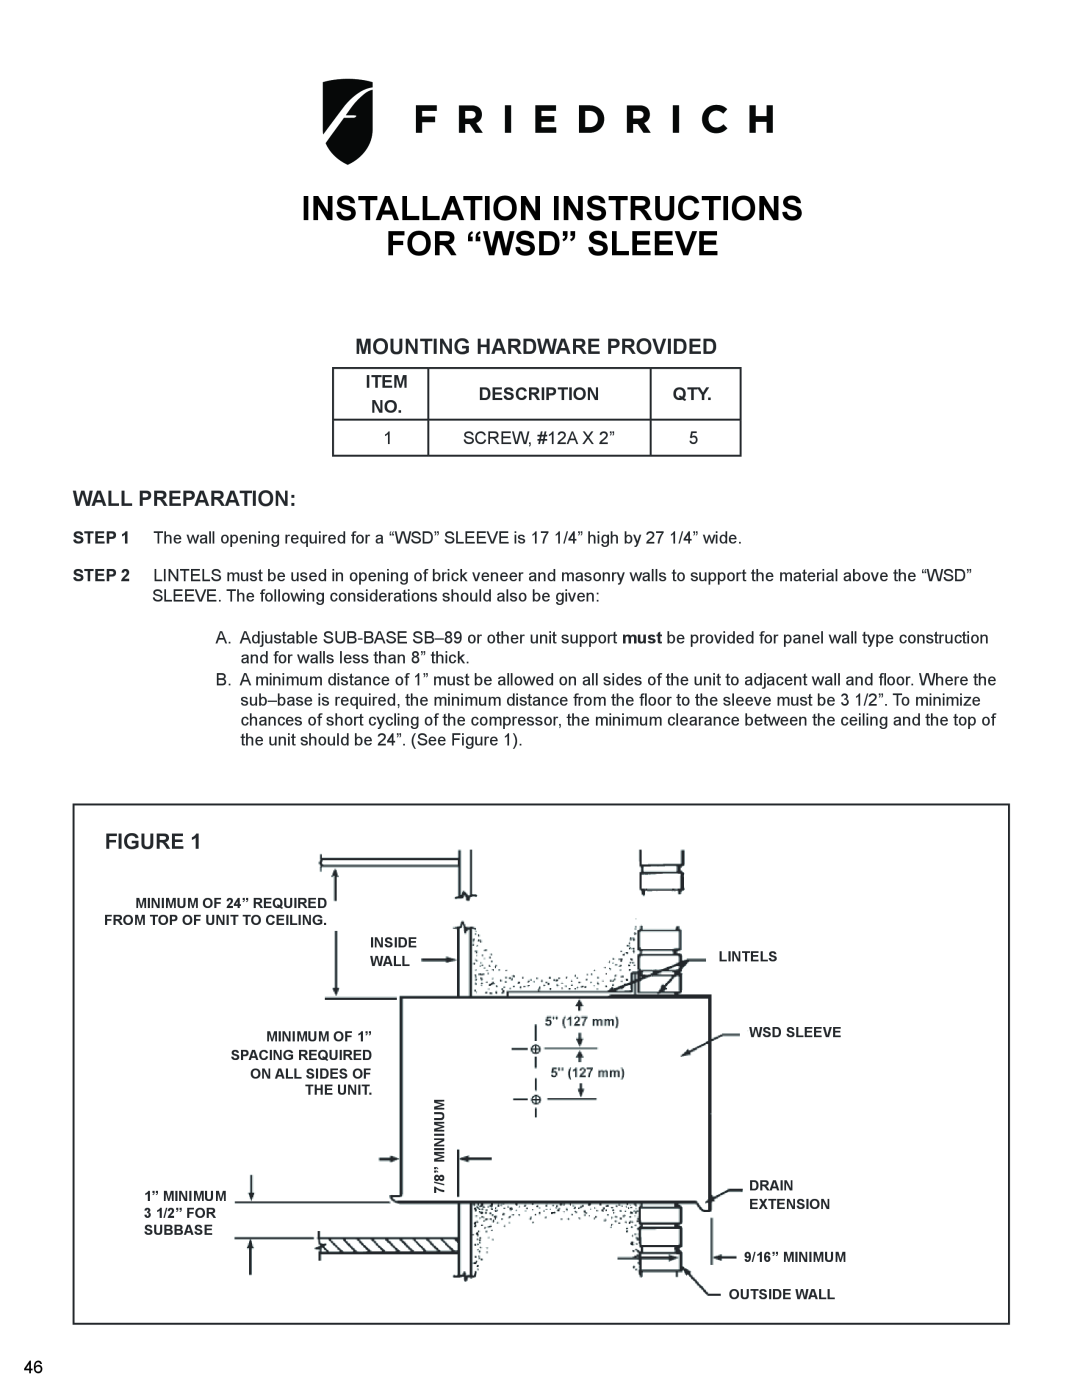 Friedrich WS10B10 Installation Instructions For “Wsd”” Sleeve, Mounting Hardware Provided, Wall Preparation 